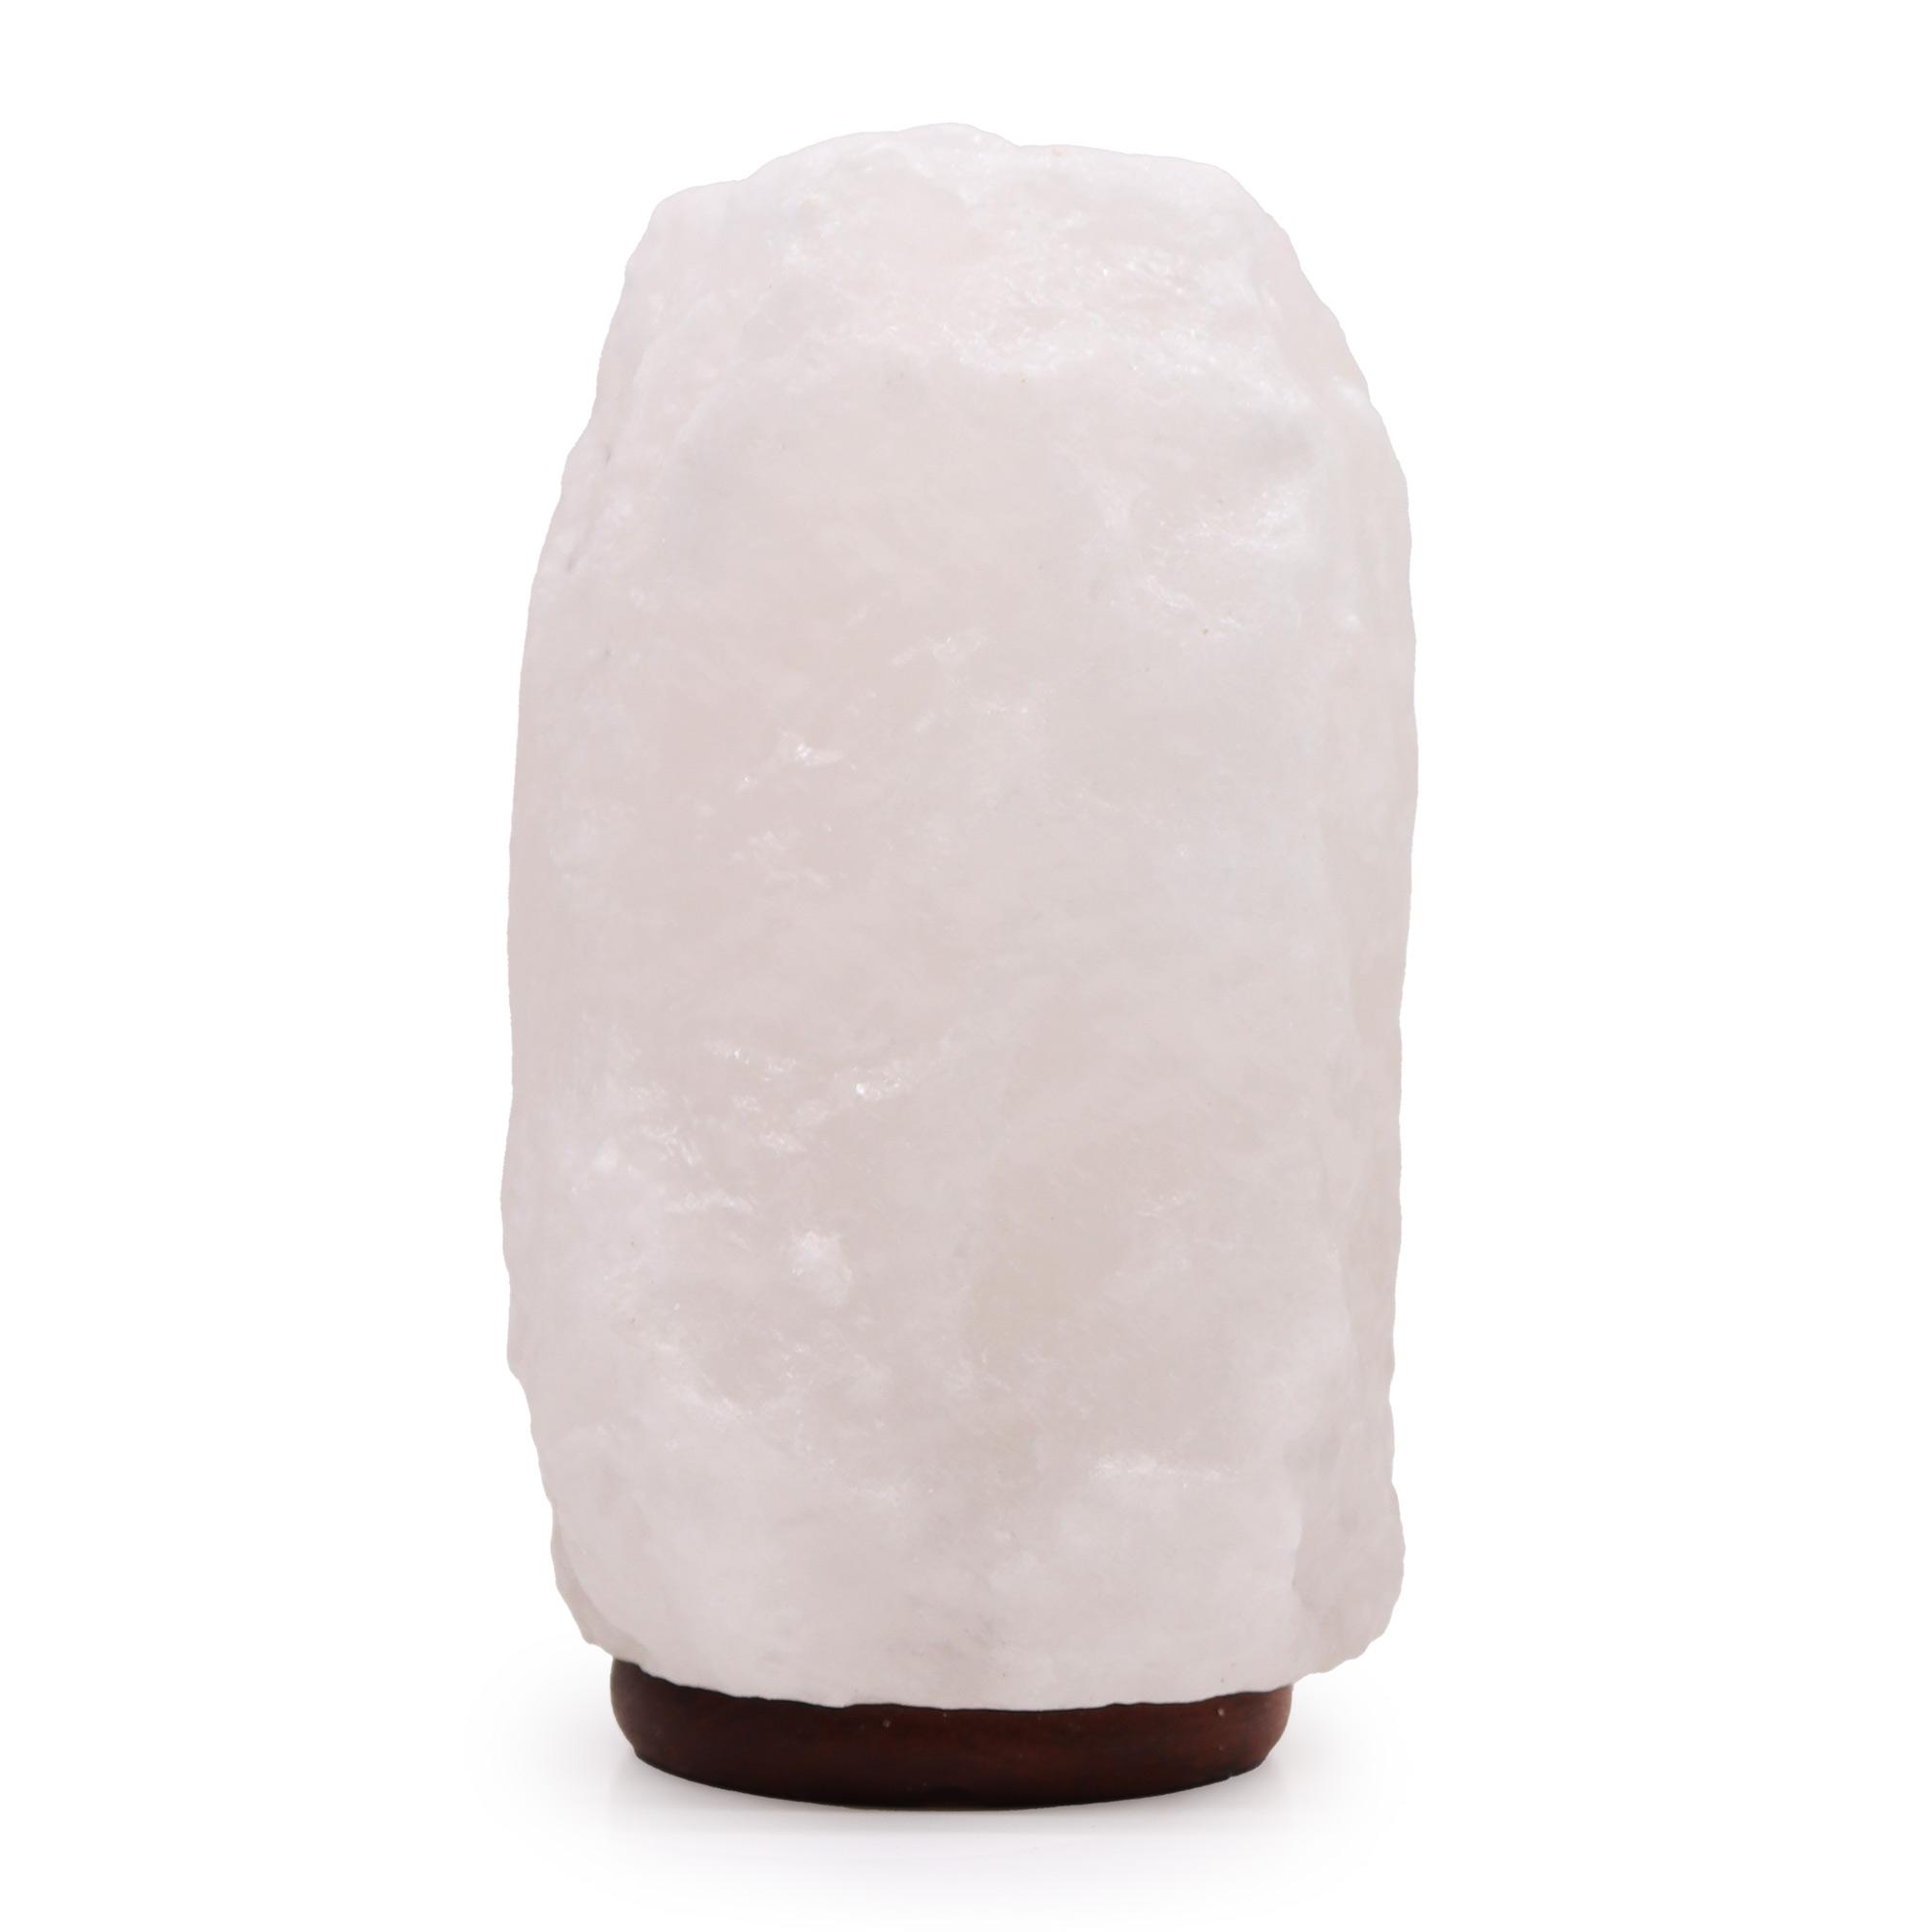 Crystal Rock Himalayan Salt Lamp with Wooden Base - 8 to 10 kg